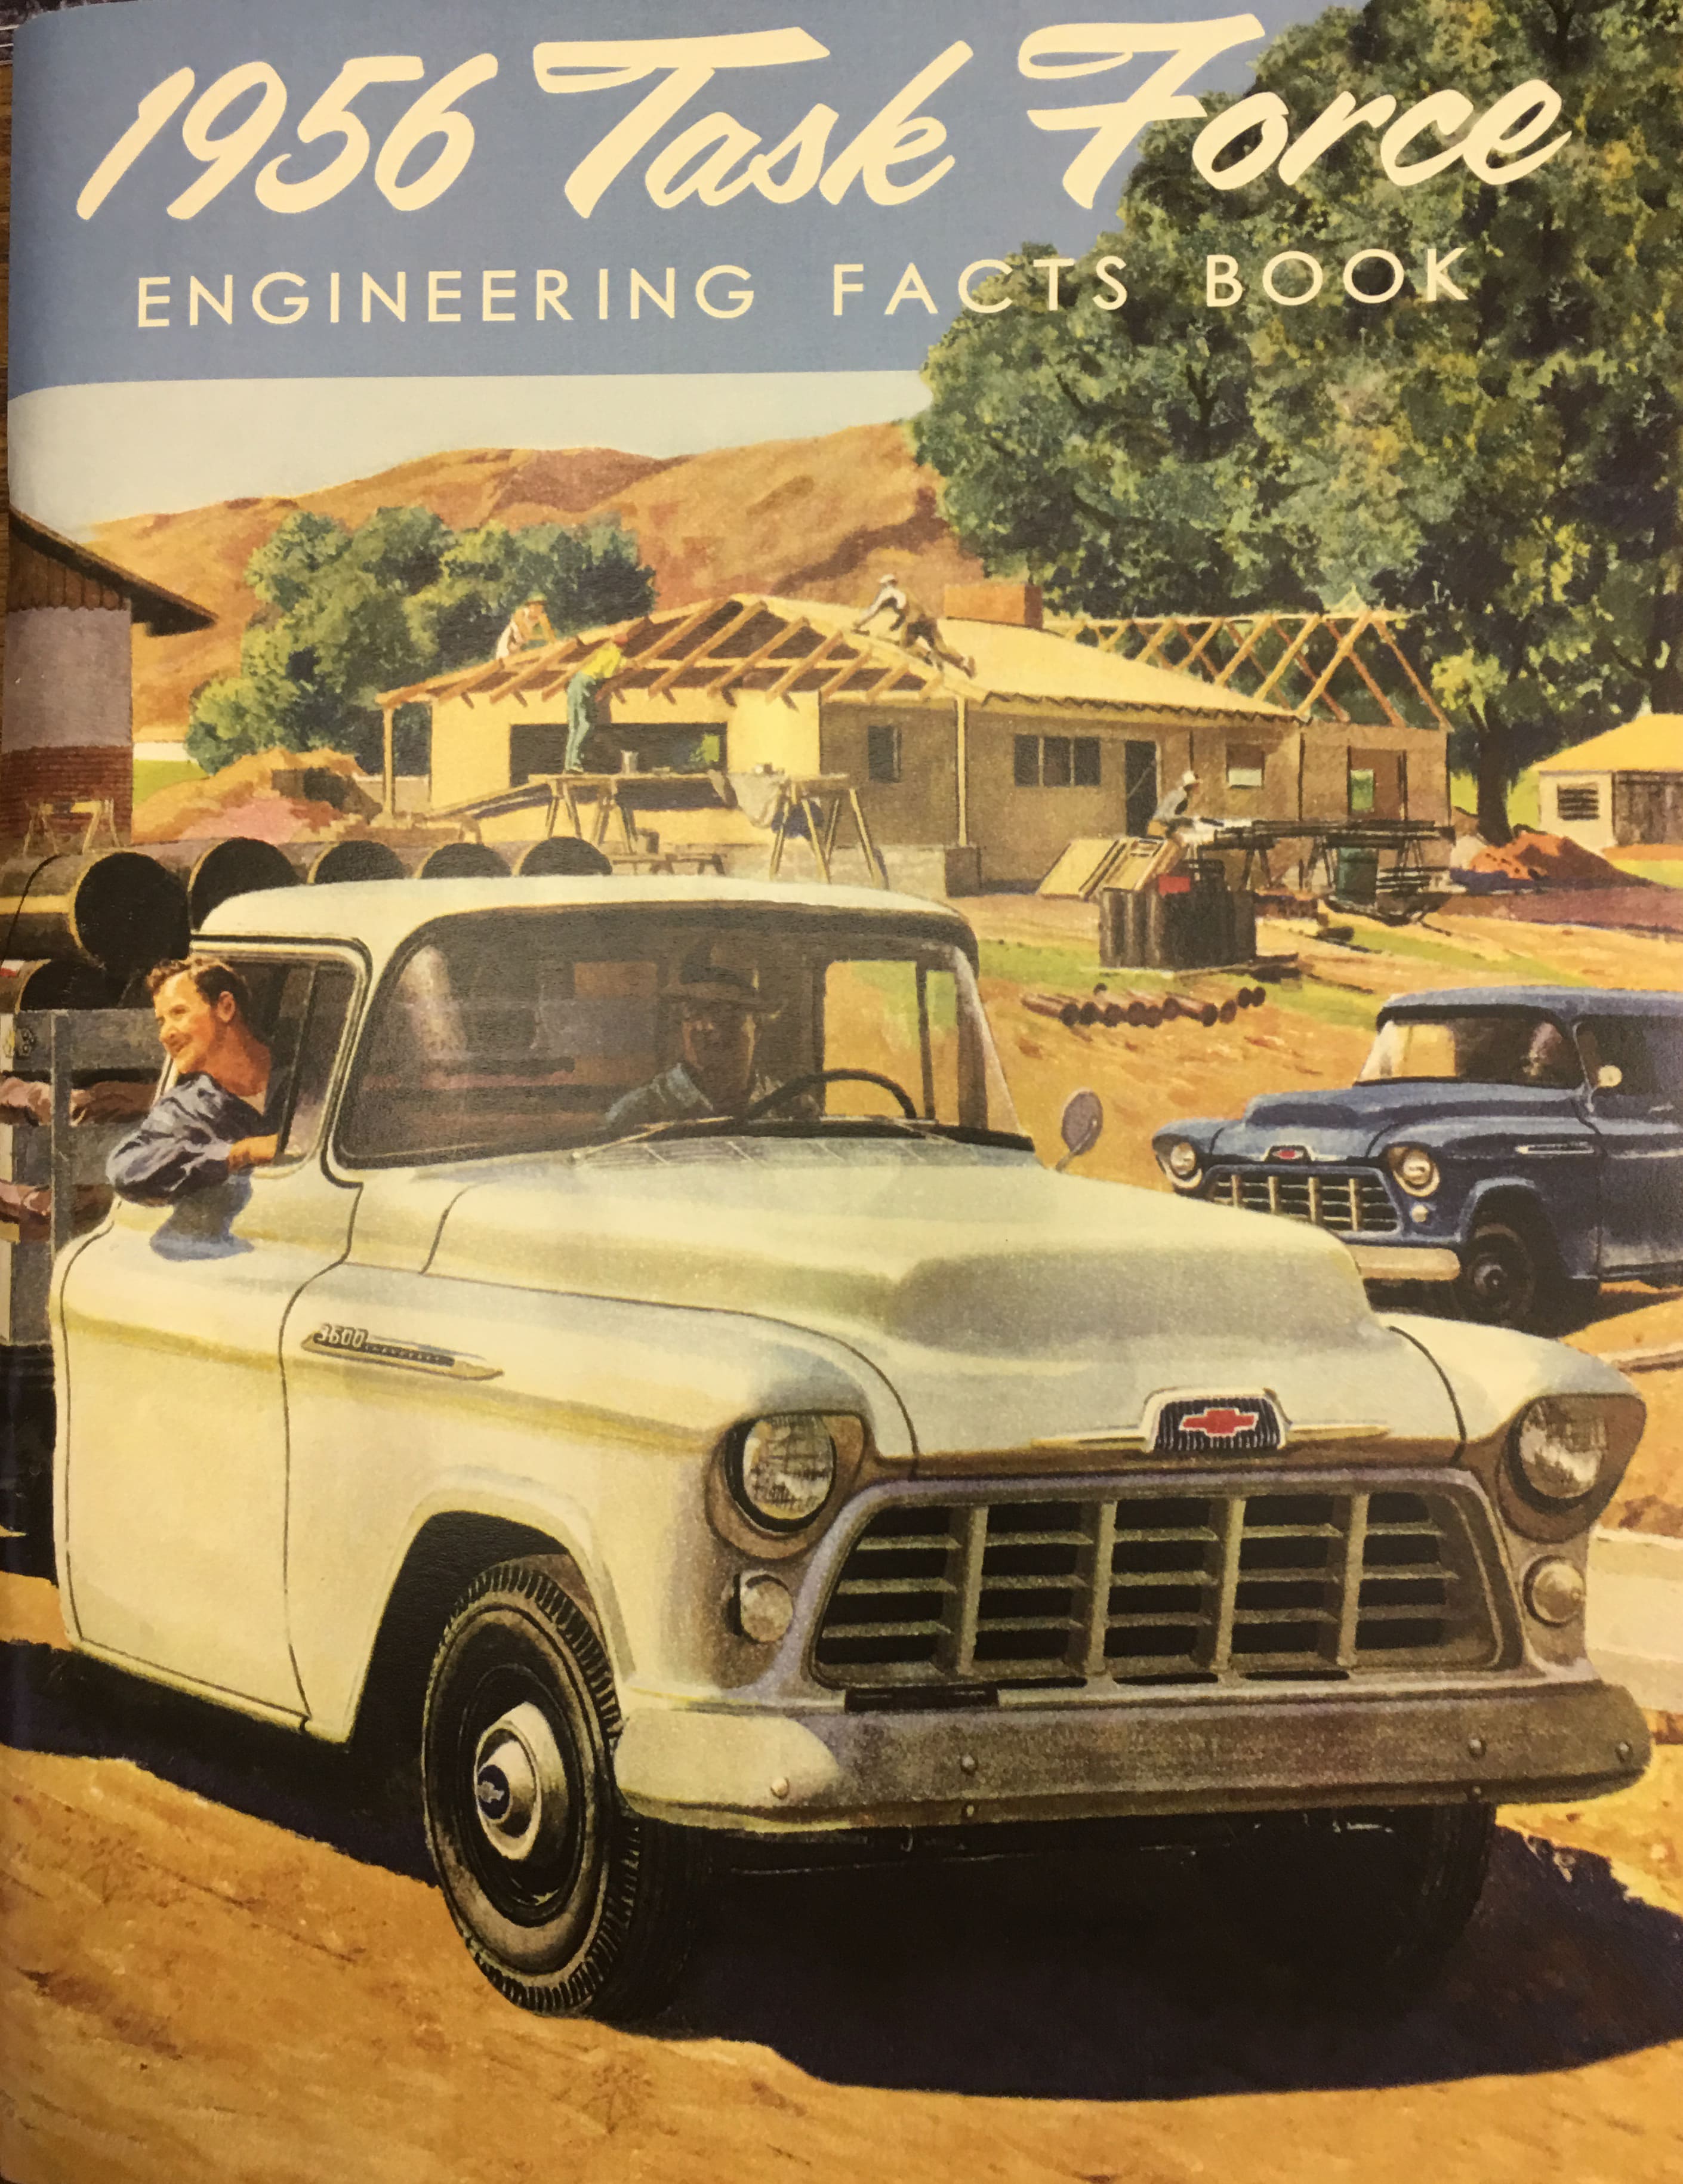 Booklet Enginering Facts 1956 Task Force